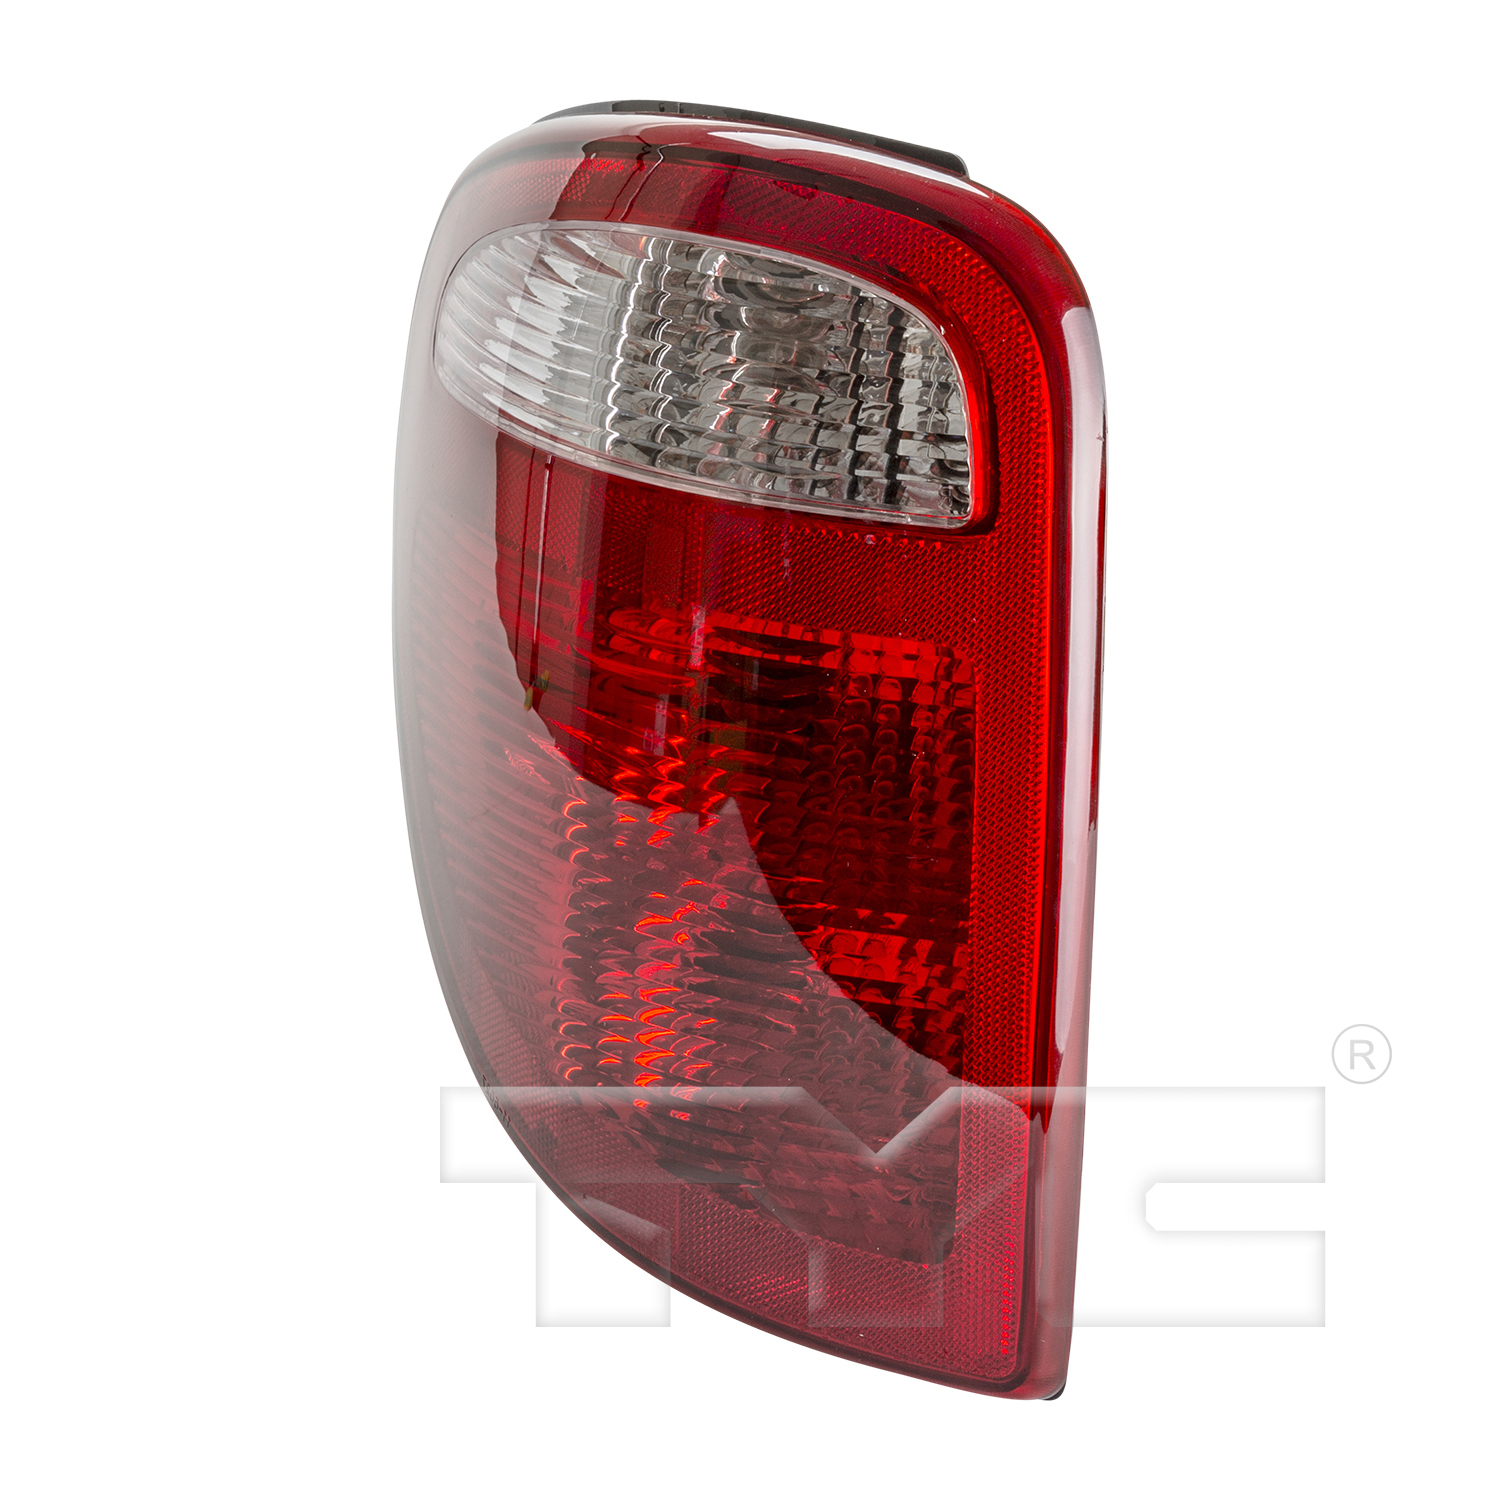 Aftermarket TAILLIGHTS for CHRYSLER - TOWN & COUNTRY, TOWN & COUNTRY,01-03,LT Taillamp assy